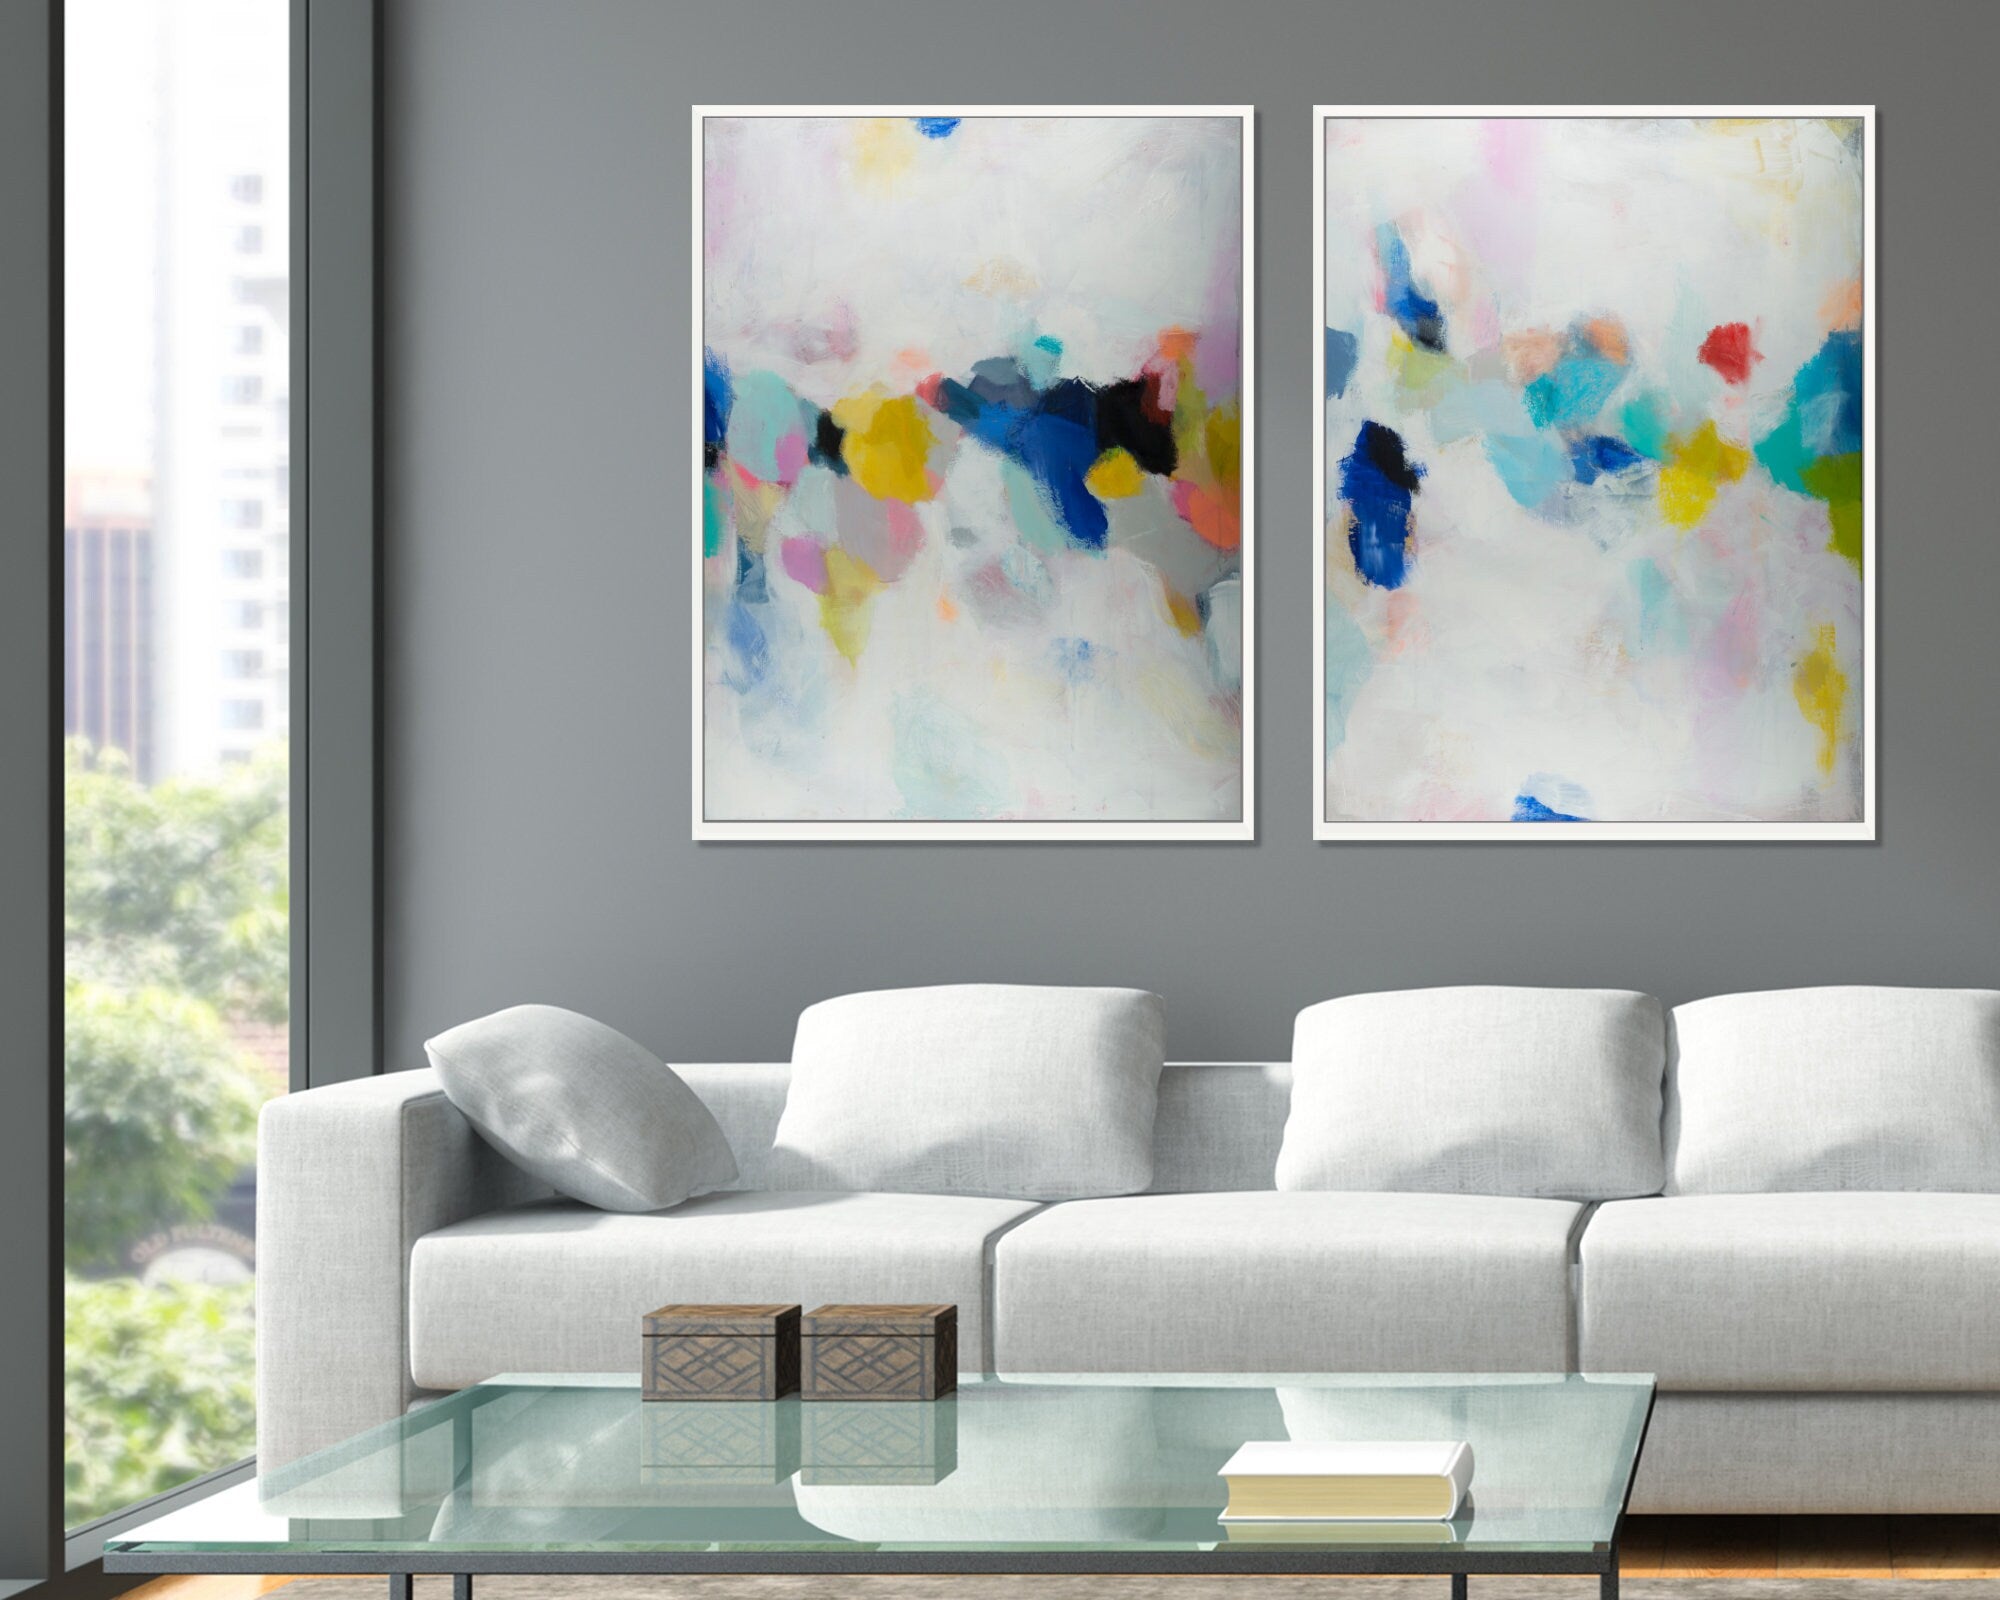 Set of 2 extra large colorful prints, Acrylic Abstract Painting prints of Original Wall Art, abstract wall art, large abstract art